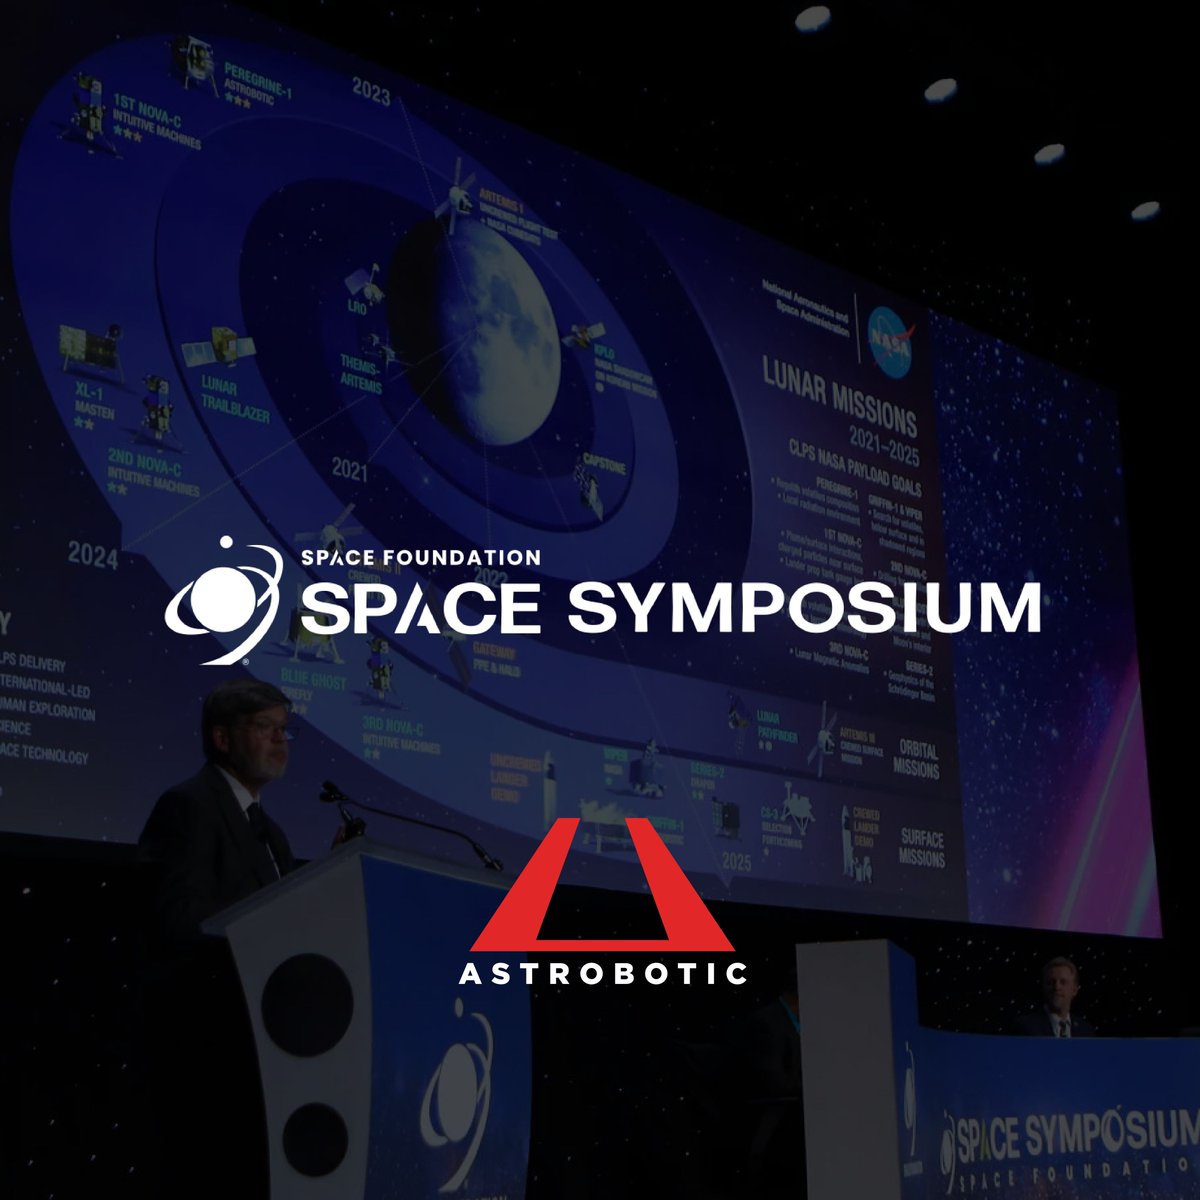 Last chance to schedule a time to connect with Astrobotic leadership at next week's Space Symposium 2024. Complete this form to connect with an Astrobotic representative during the next week's conference: buff.ly/43JKEFk